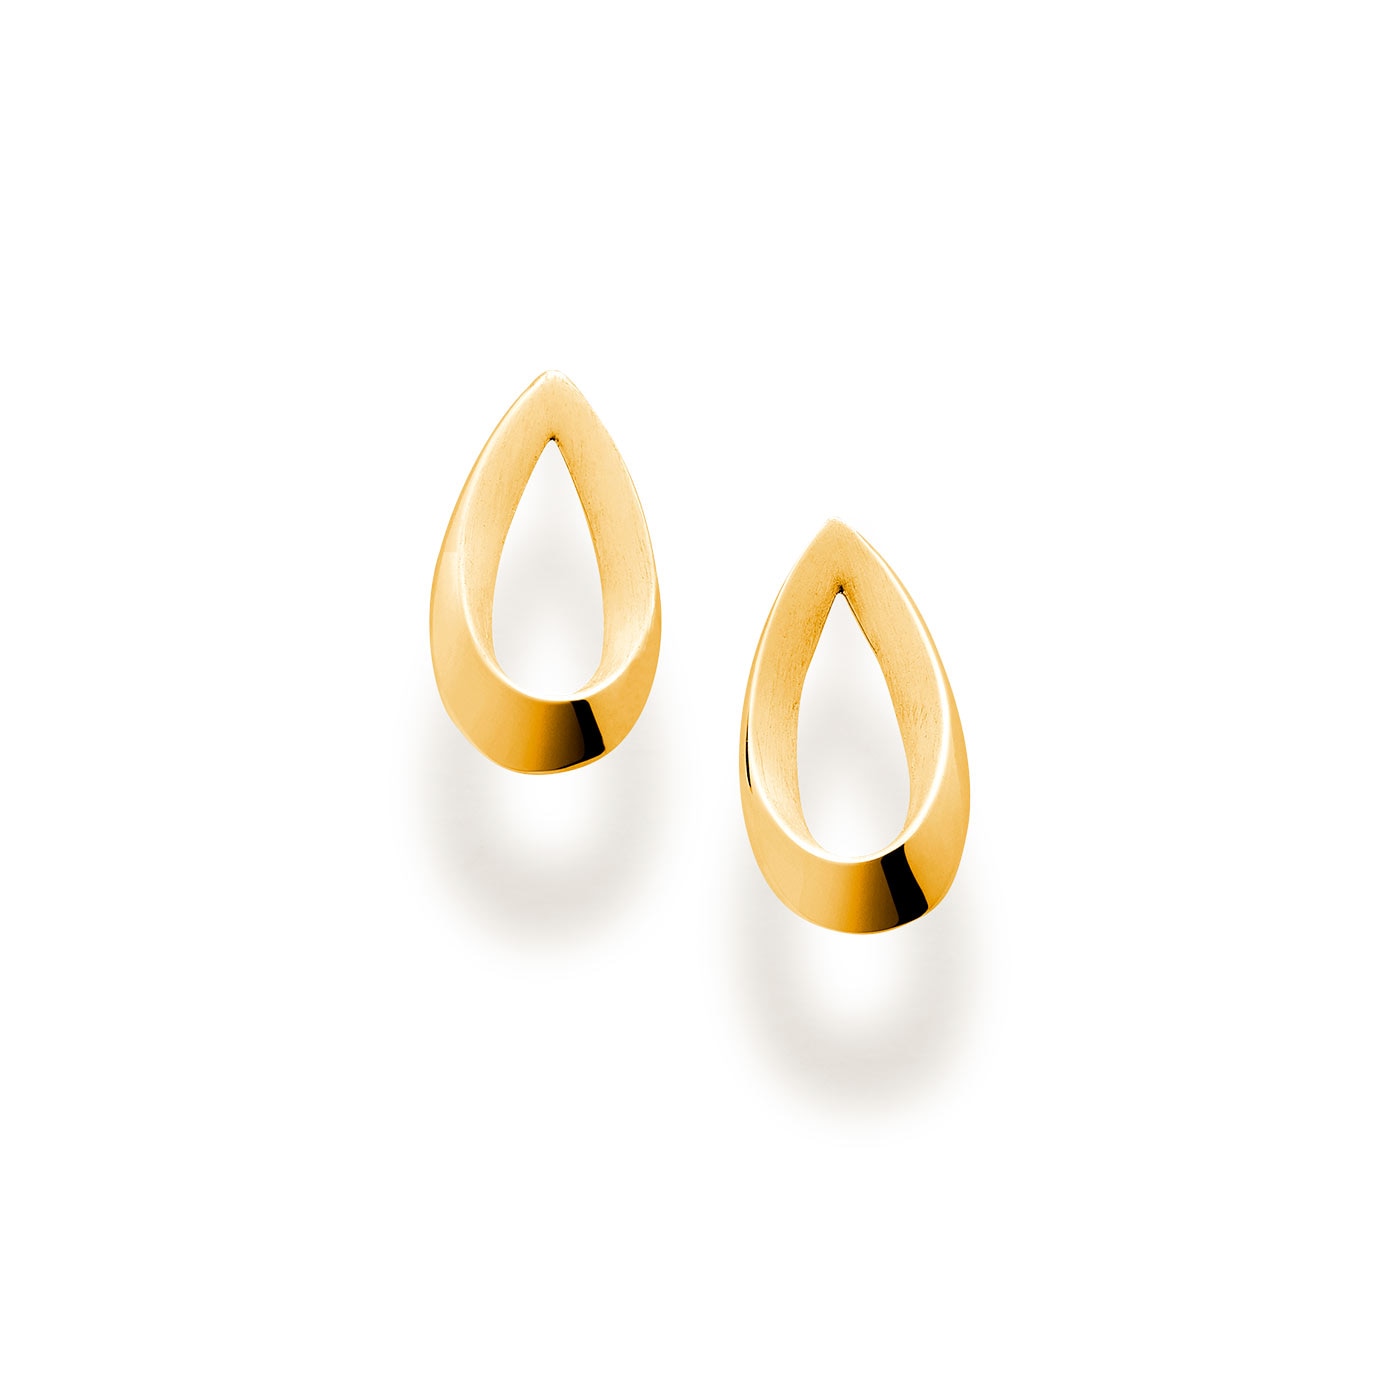 Raindrop earrings gold plated